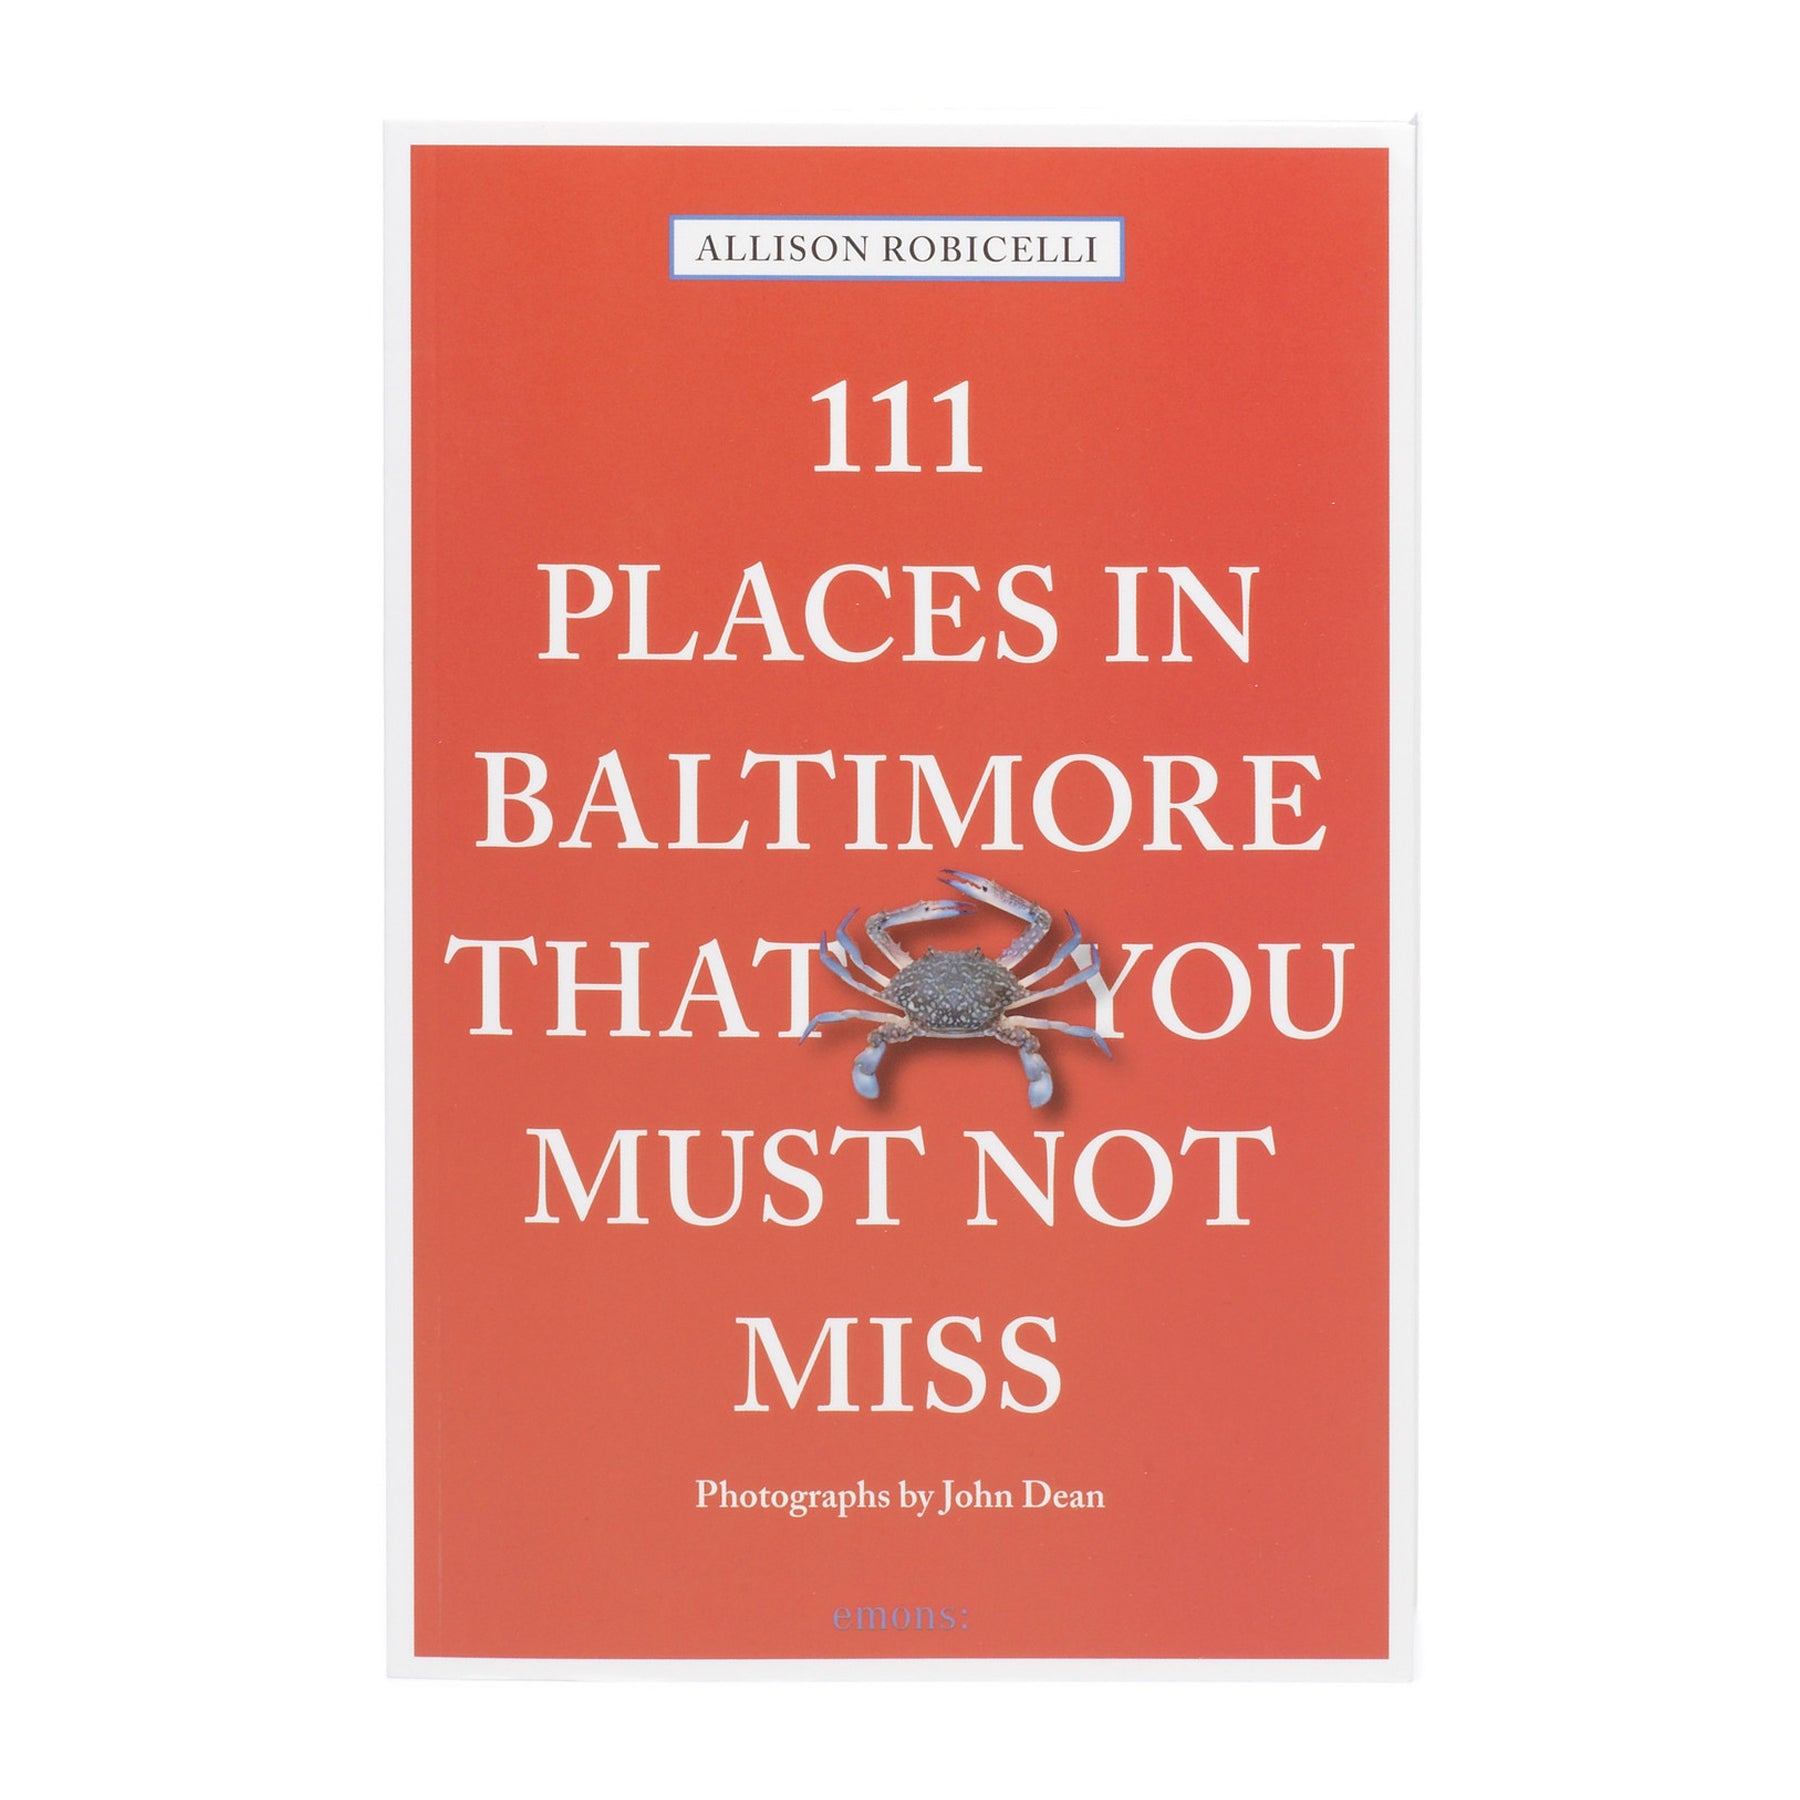 111 Places in Baltimore That You Must Not Miss